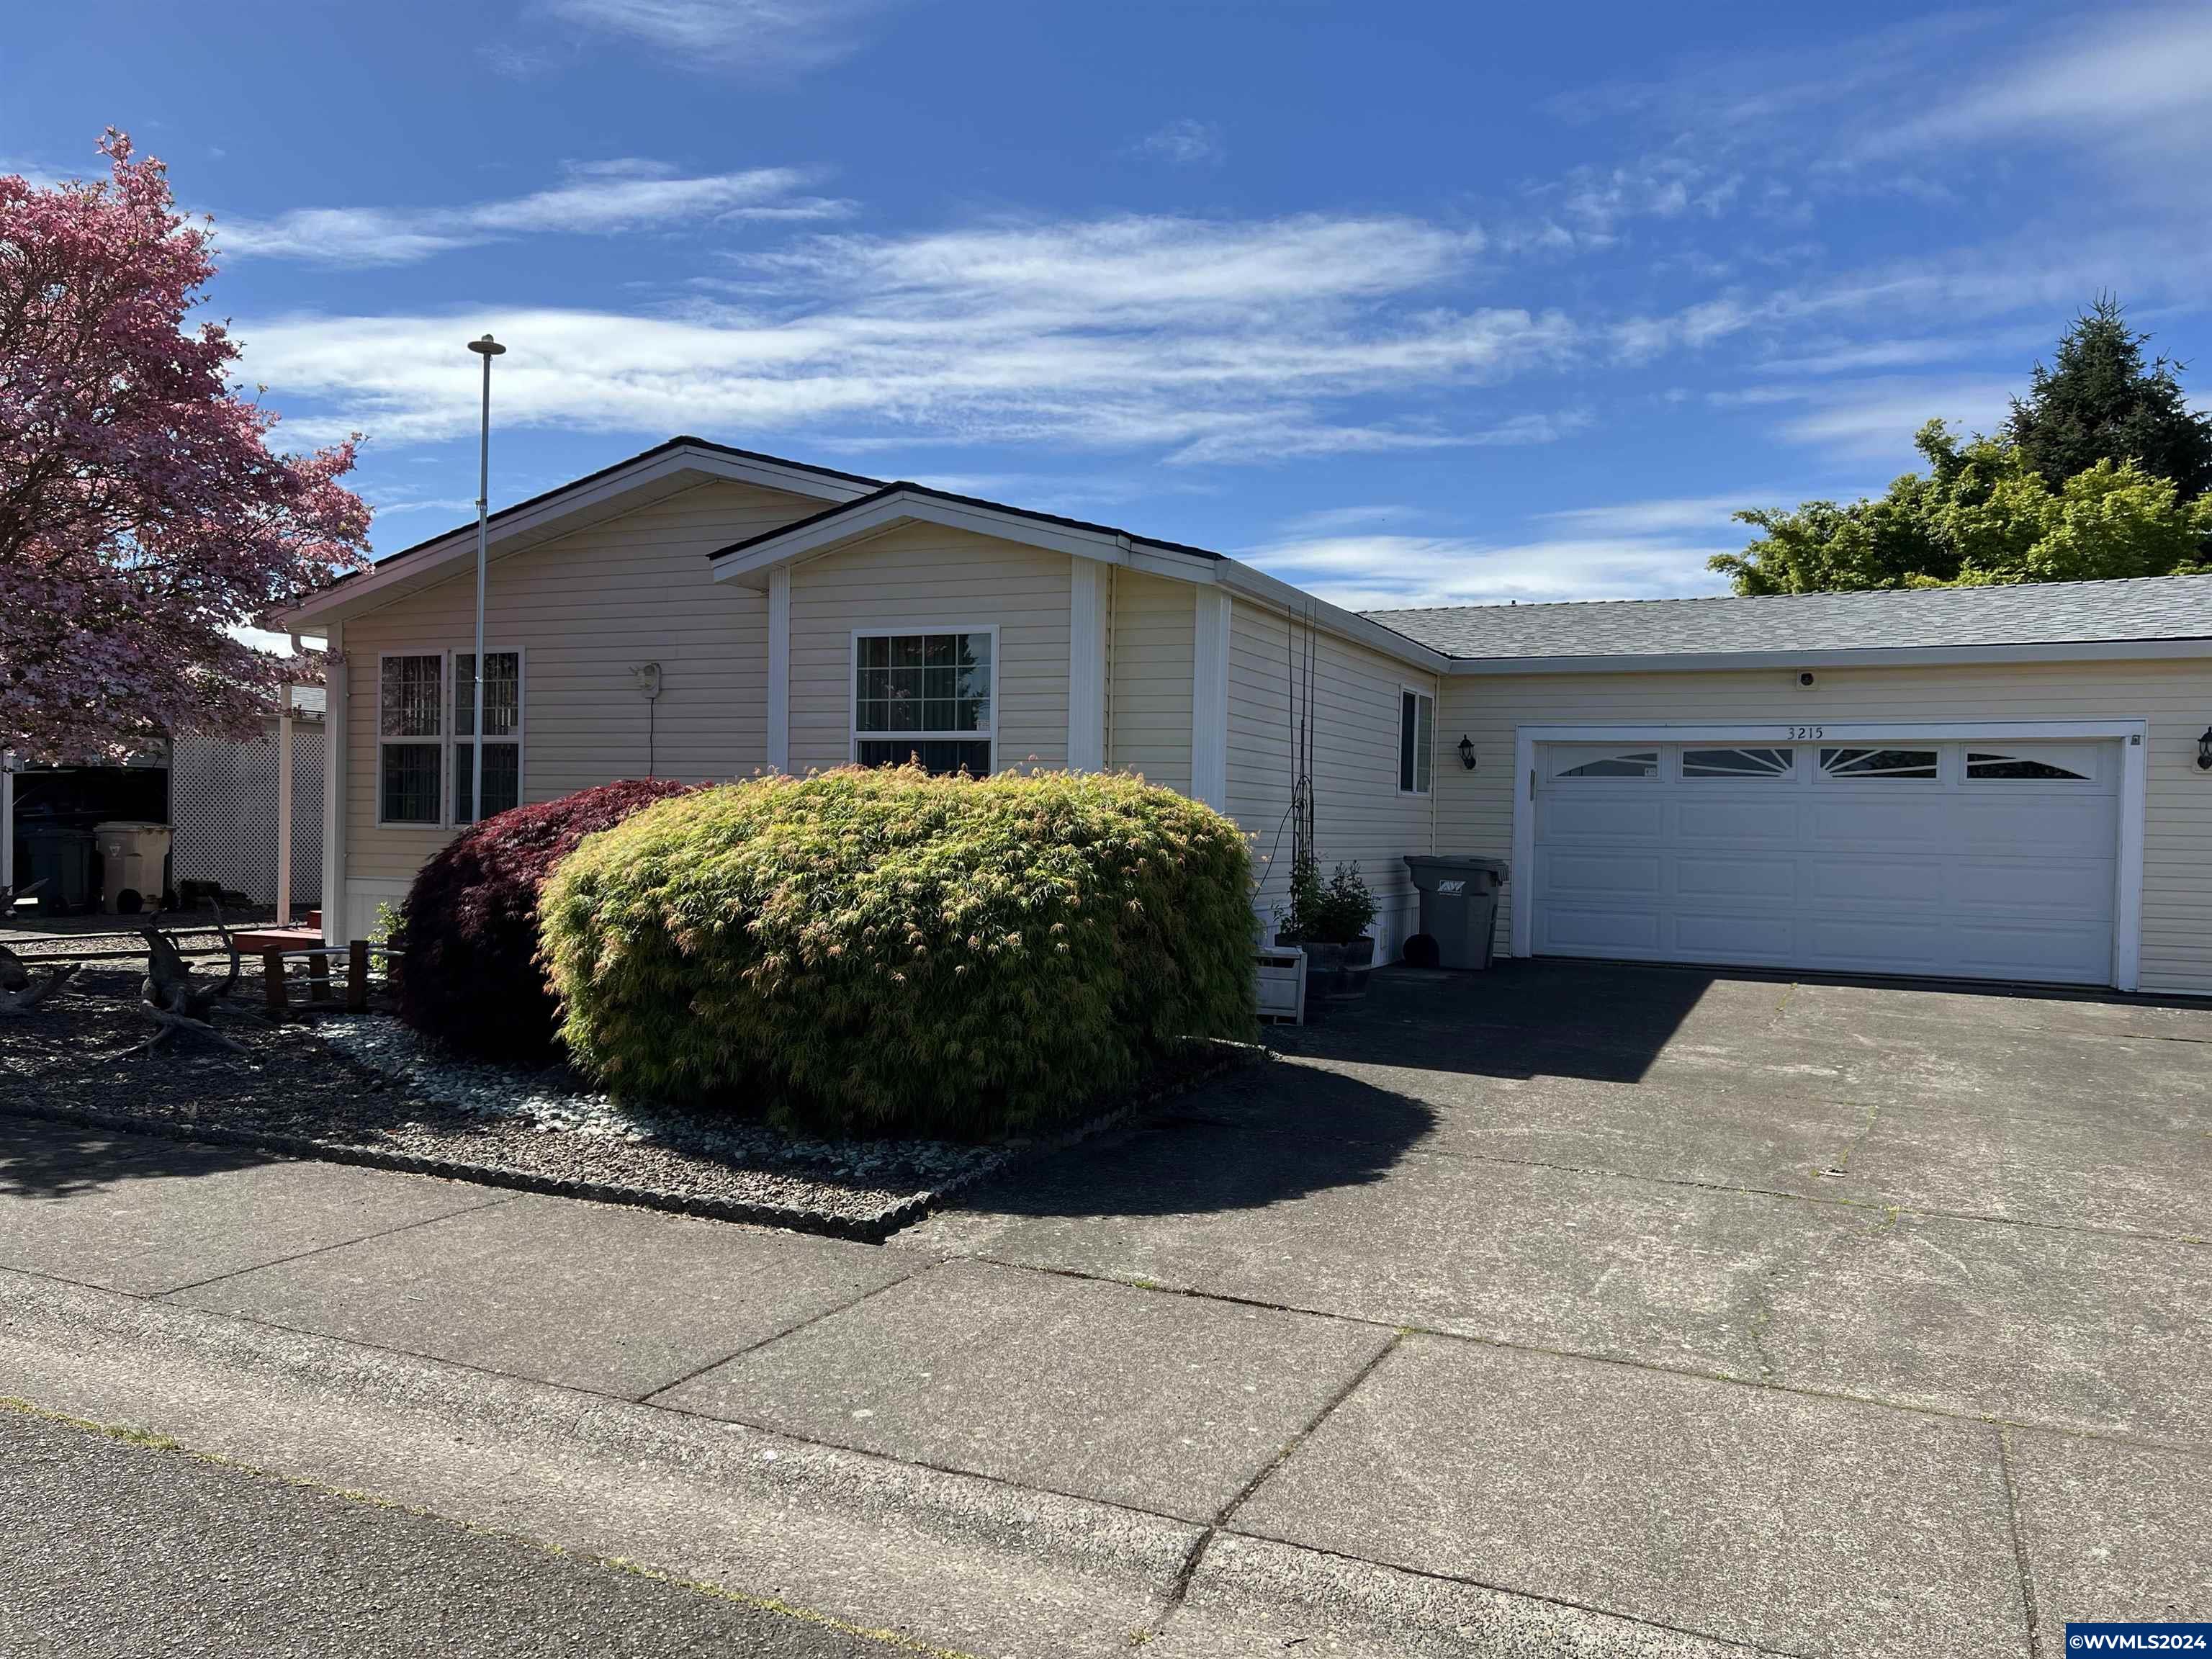 Come and see! This beautiful 2bd/2ba 1512sf MFG home, with loads of storage, on it's own land on the west side of town. Well maintained home with new kitchen cabinets,countertops, all flooring in 2018, deck re-stained 2023, lovely fully fenced backyard with pond, covered patio with outdoor sink, automatic sprinkler system on entire property, low maintenance vinyl siding and windows in 2006, 2-car garage and considerable amount of additional parking space.